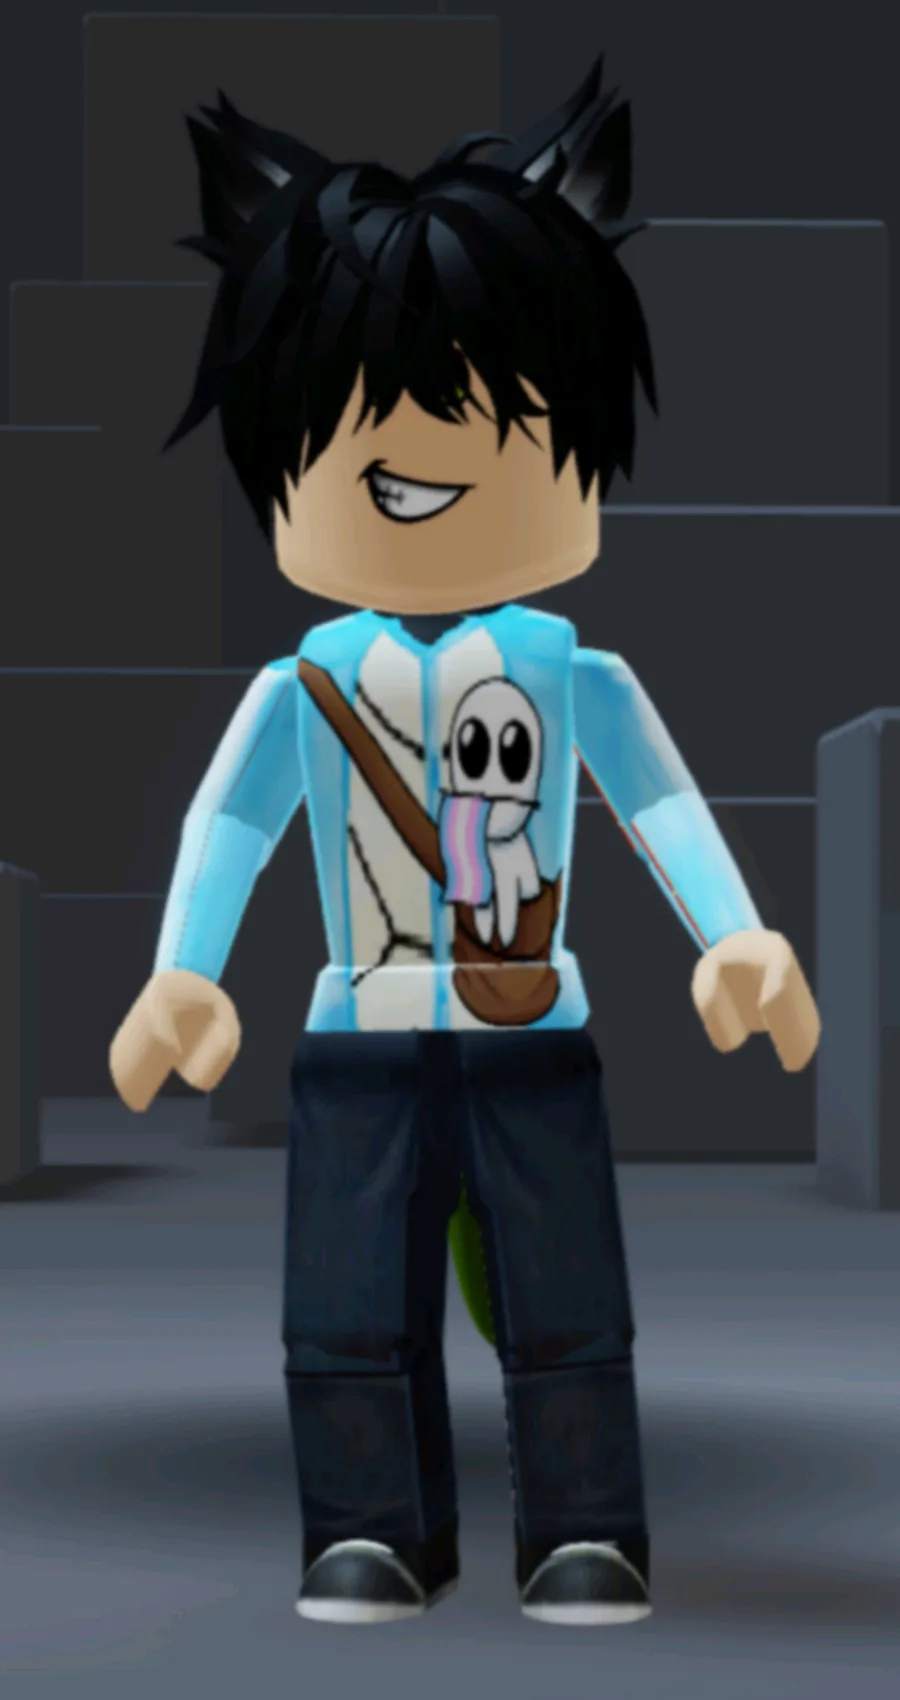 My Roblox avatar  Roblox pictures, Roblox, Cool avatars